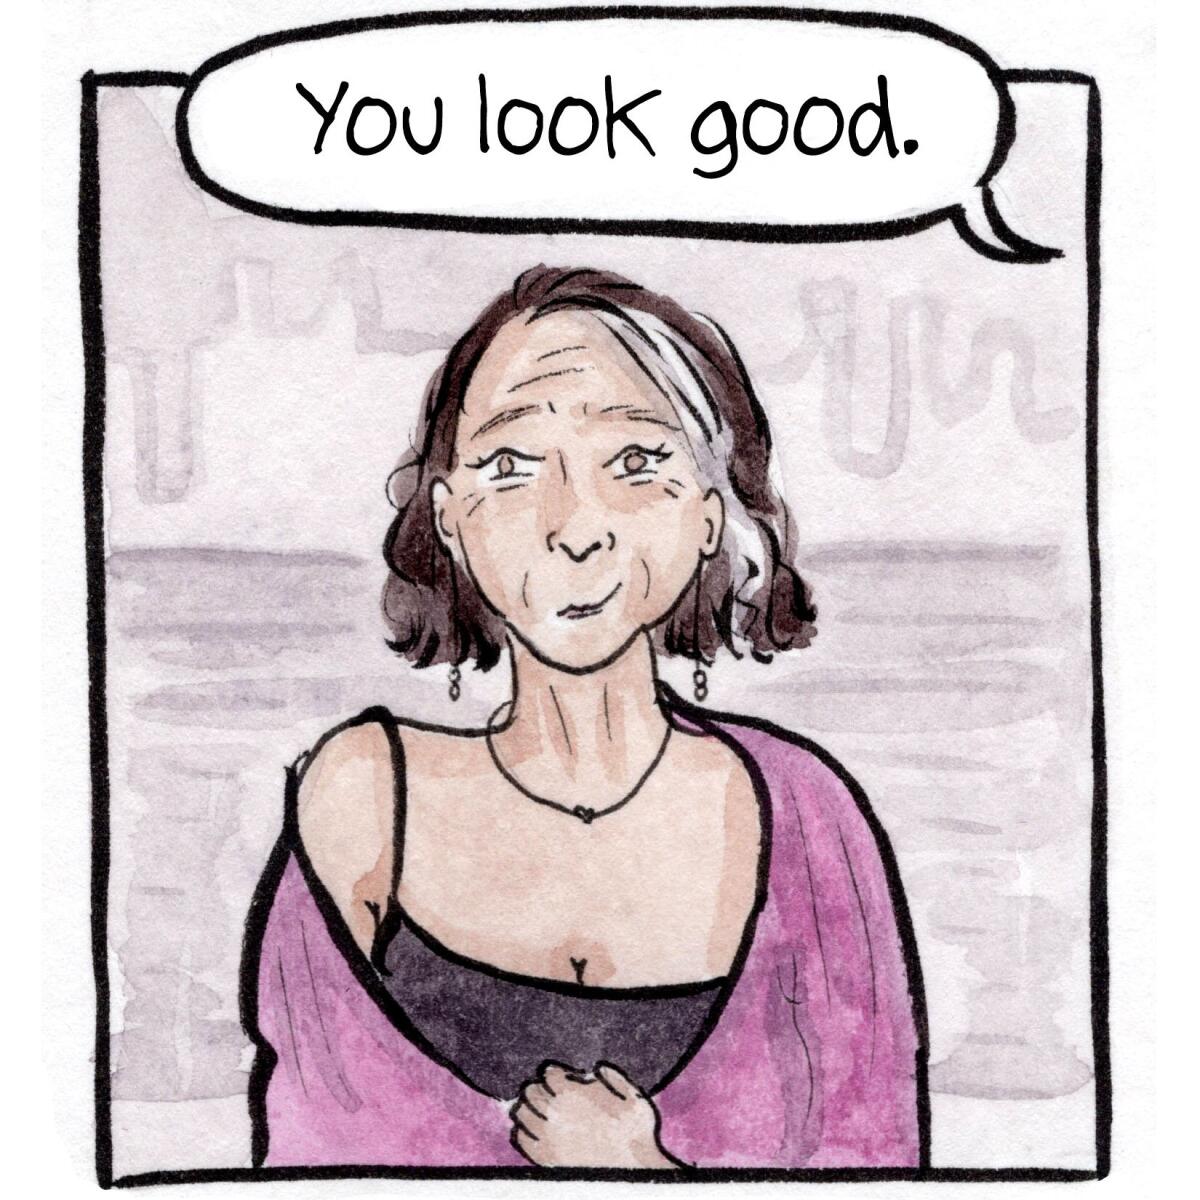 Someone says, "You look good," to a woman with a pink shawl and a streak of gray hair.